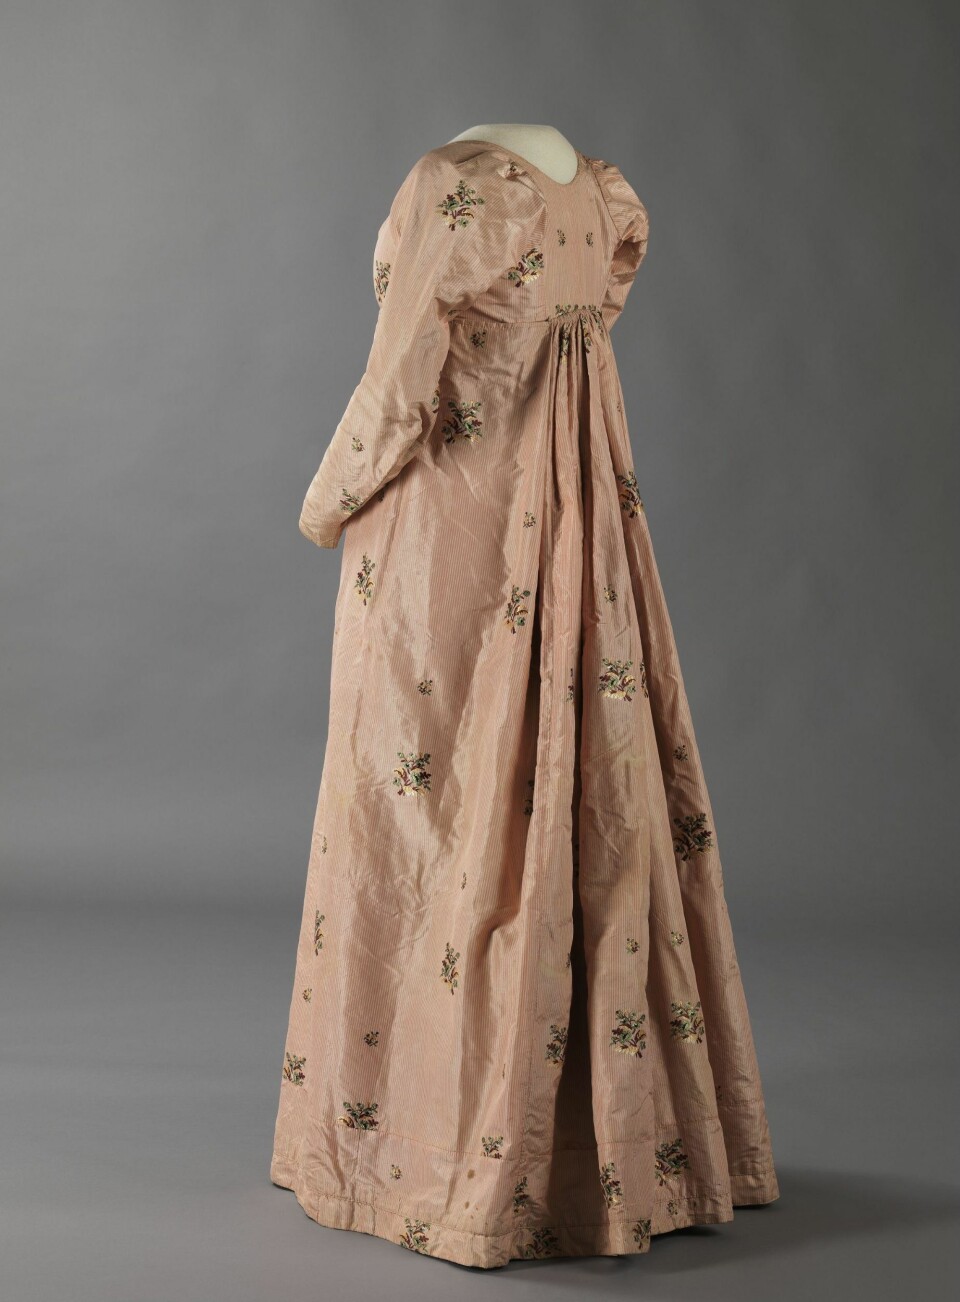 This dress shape is from 1800-1810s, but the silk fabric is from the 1780s. (Photo: National Museum of Art, Architecture and Design)